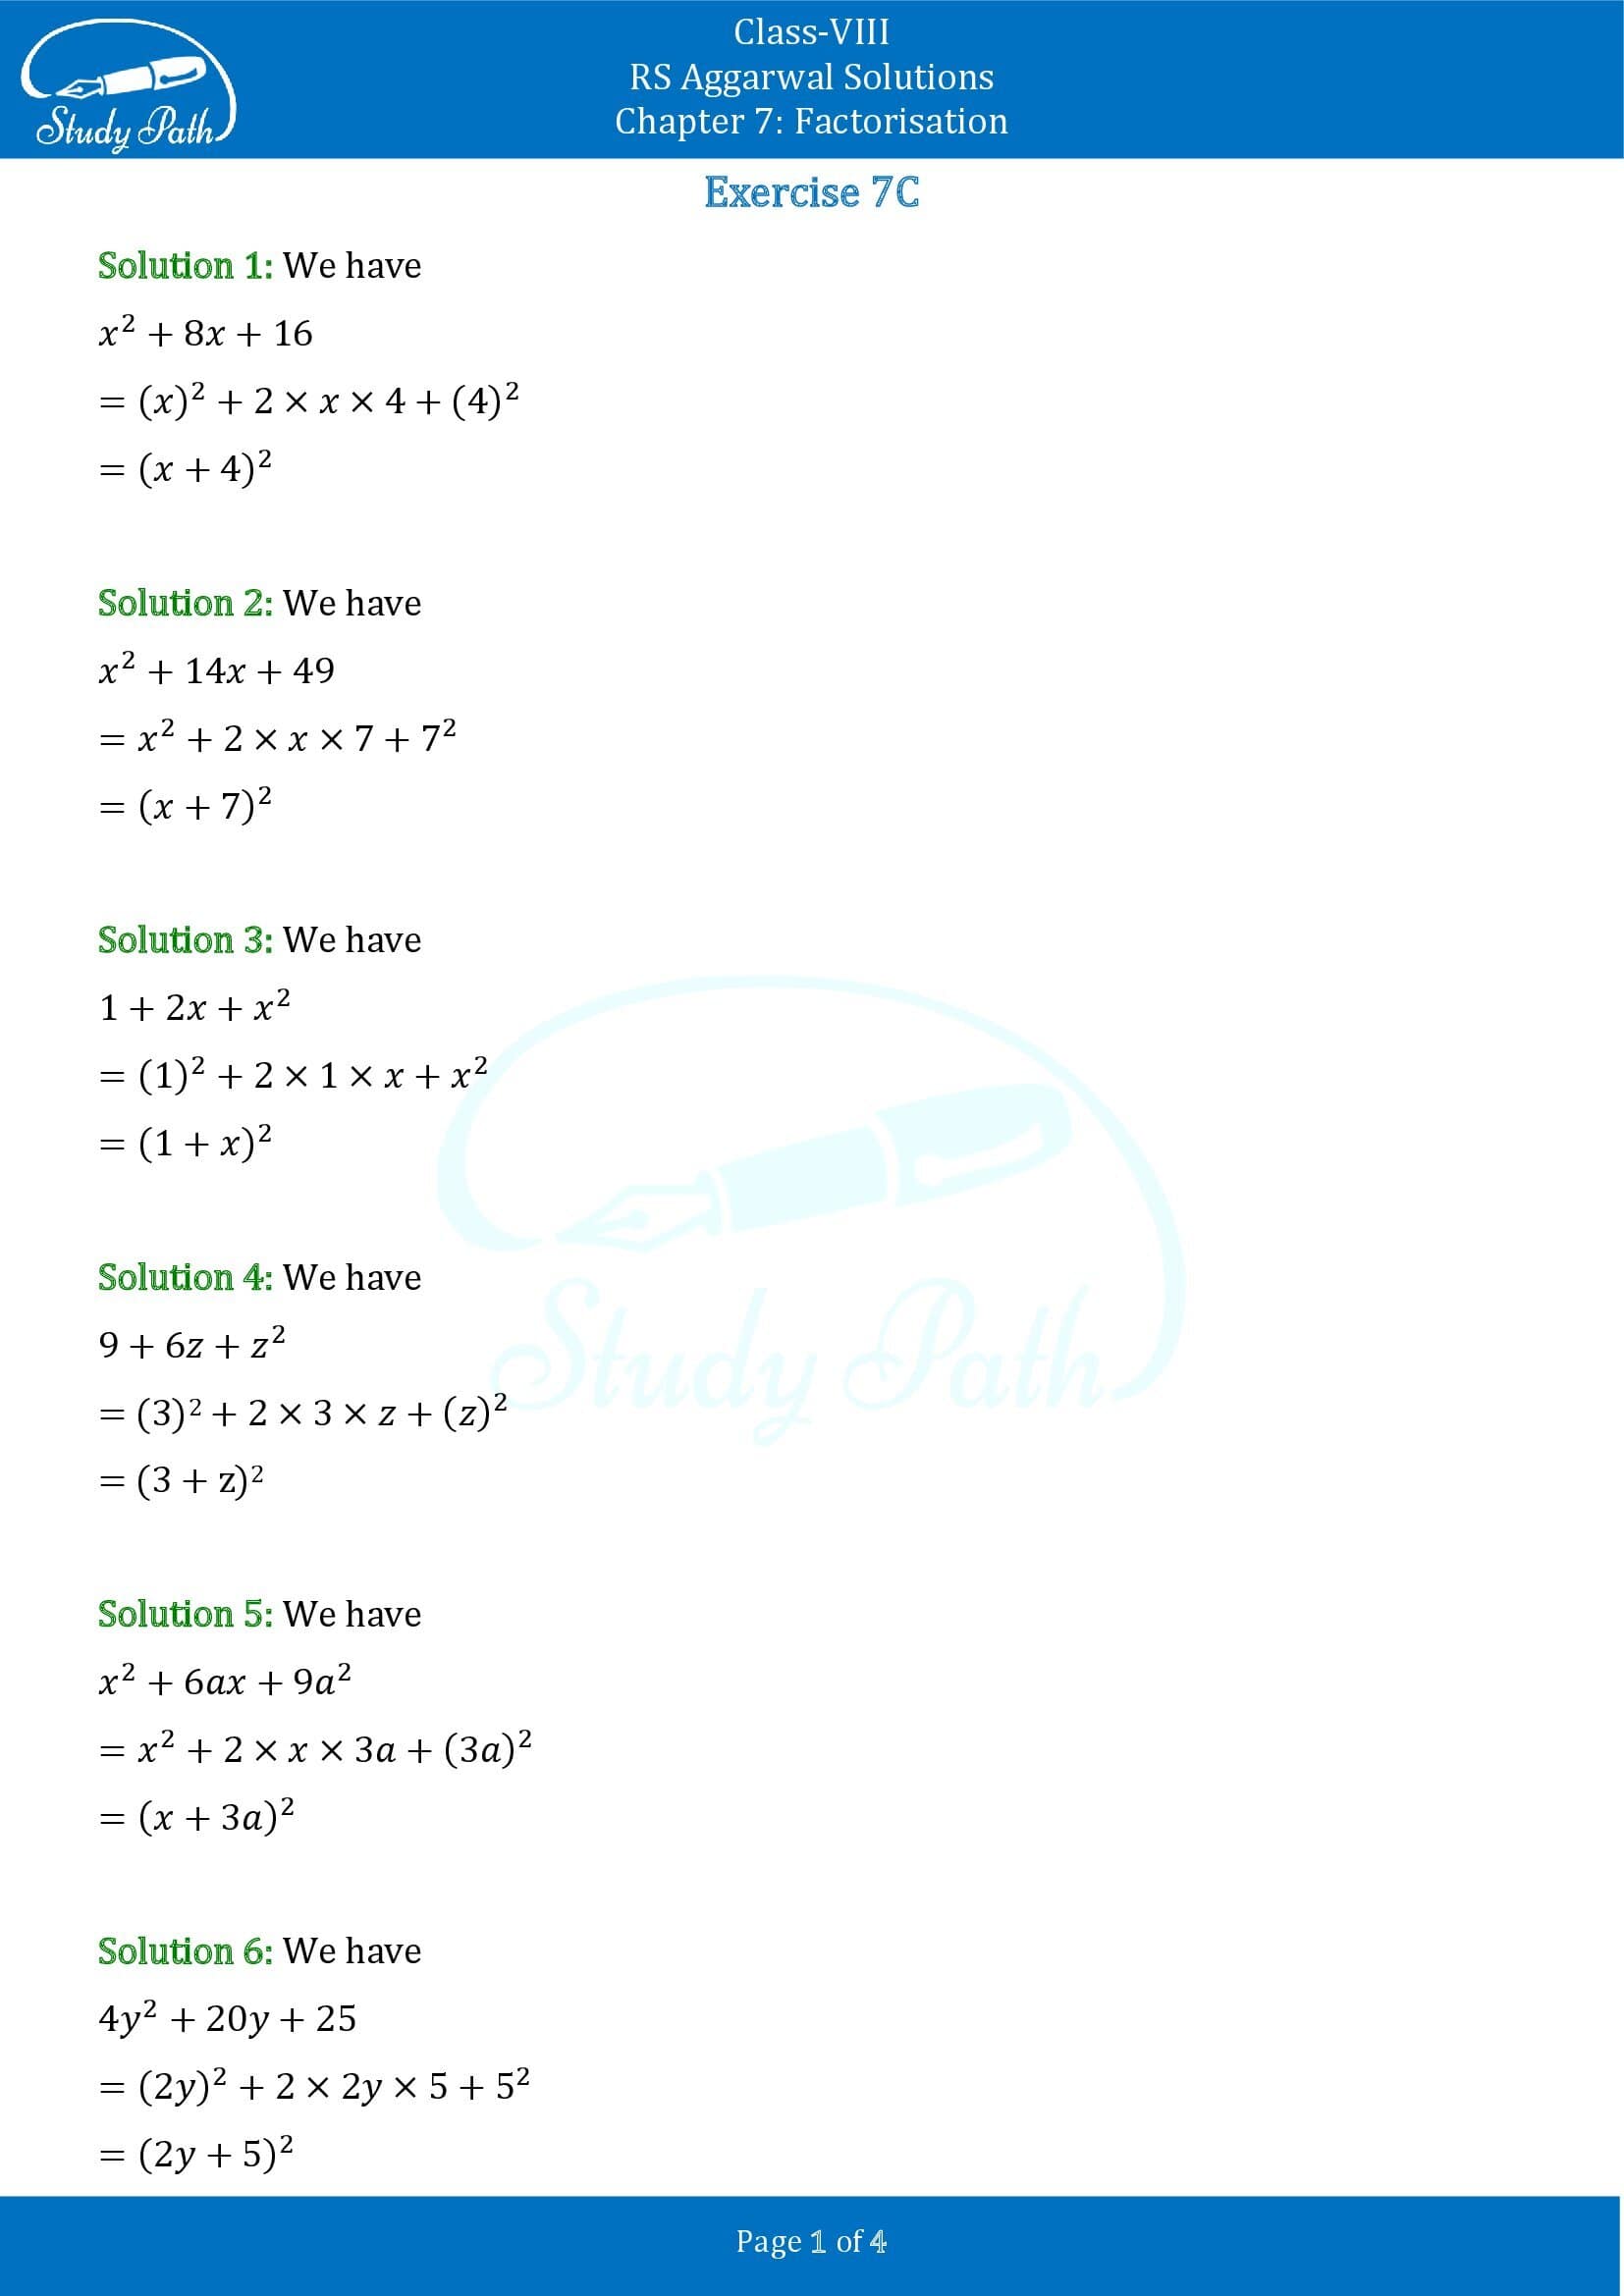 RS Aggarwal Solutions Class 8 Chapter 7 Factorisation Exercise 7C 00001